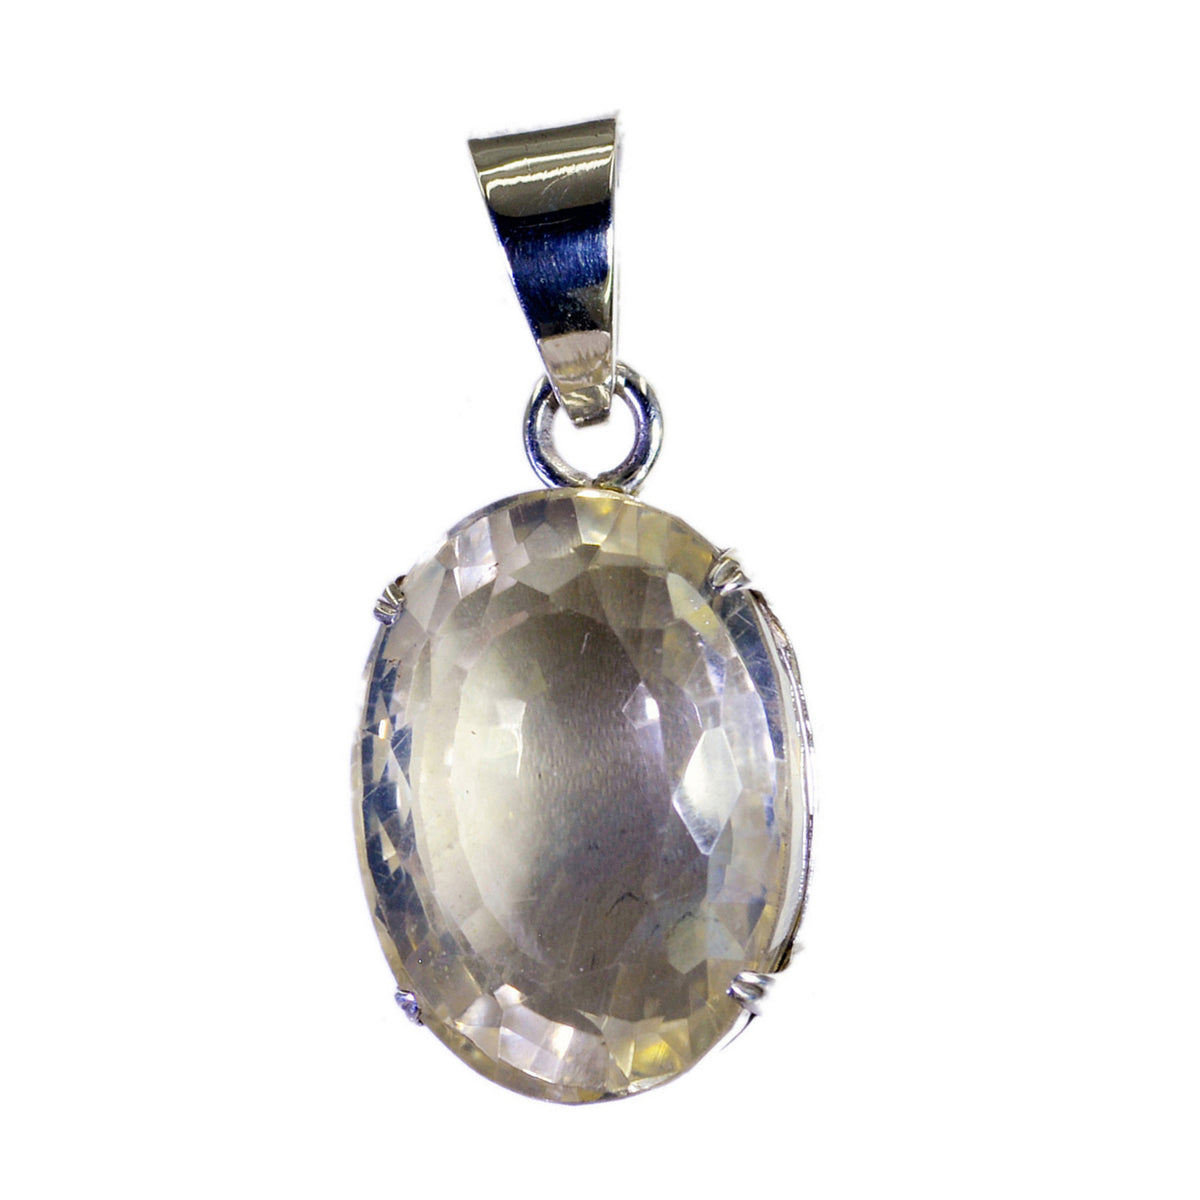 Riyo Exquisite Gemstone Oval Faceted Yellow Citrine Sterling Silver Pendant Gift For Women